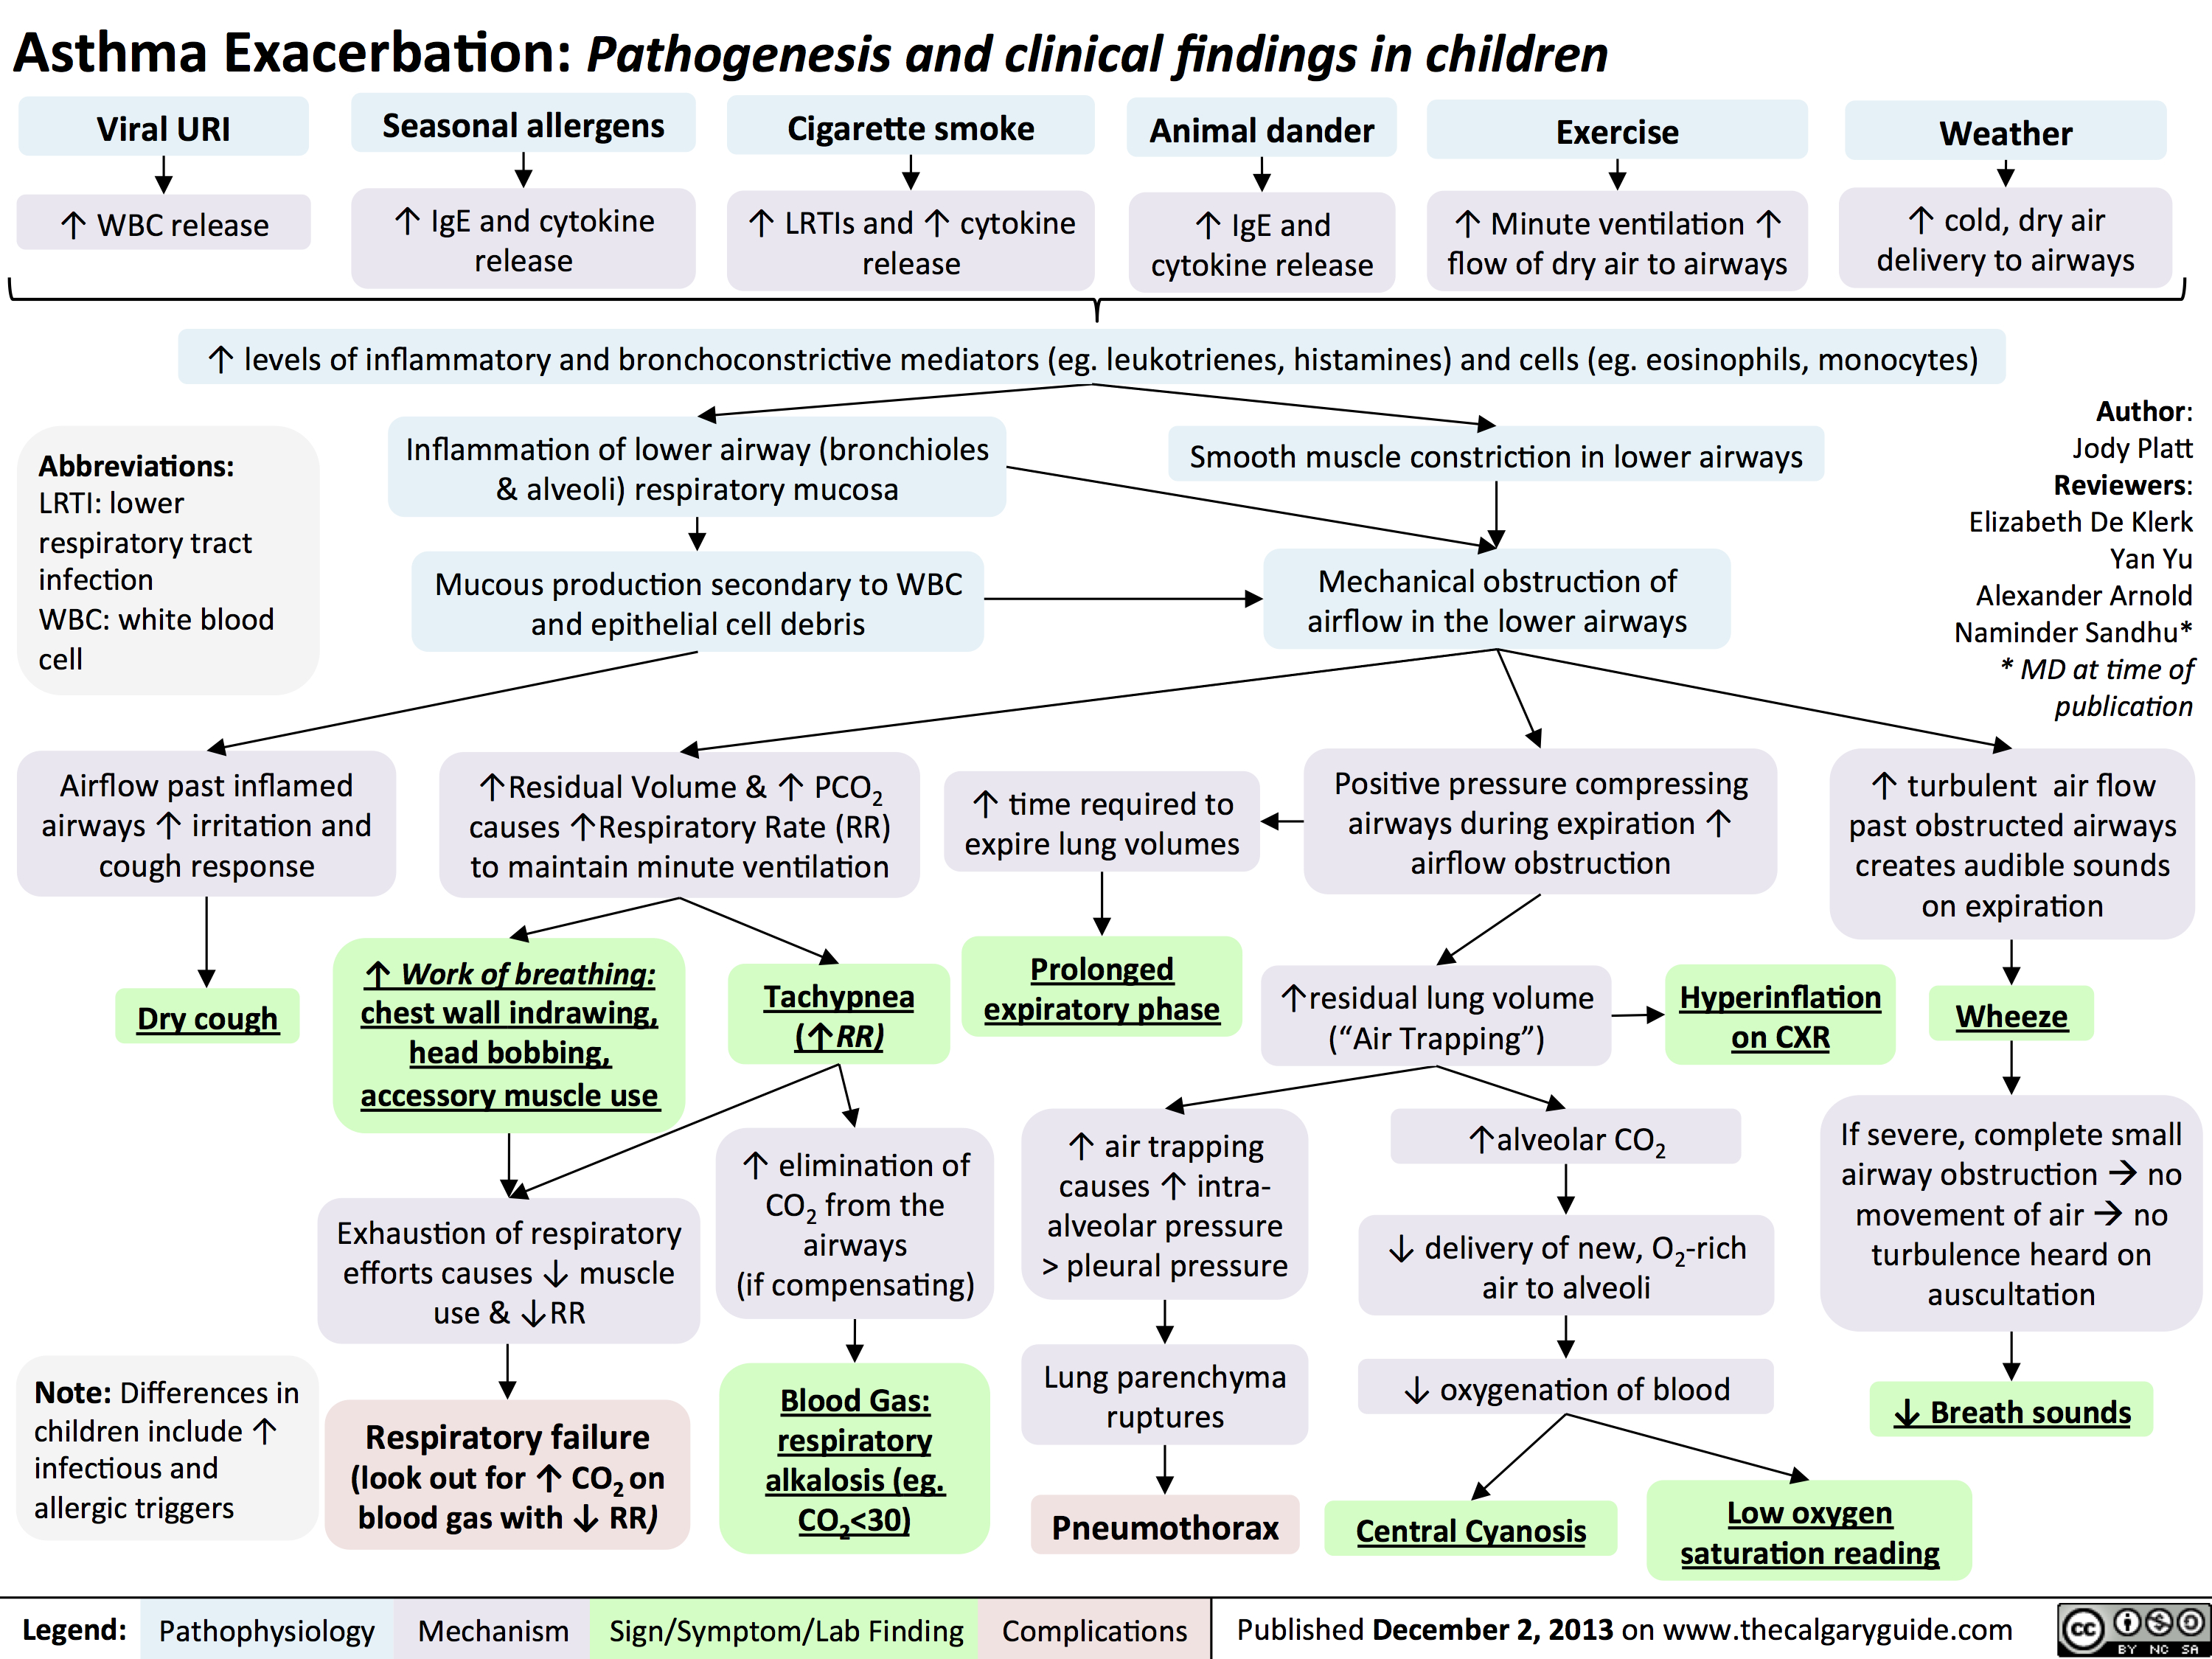 Asthma Exacerbation - Pathogenesis and Clinical Findings in Children